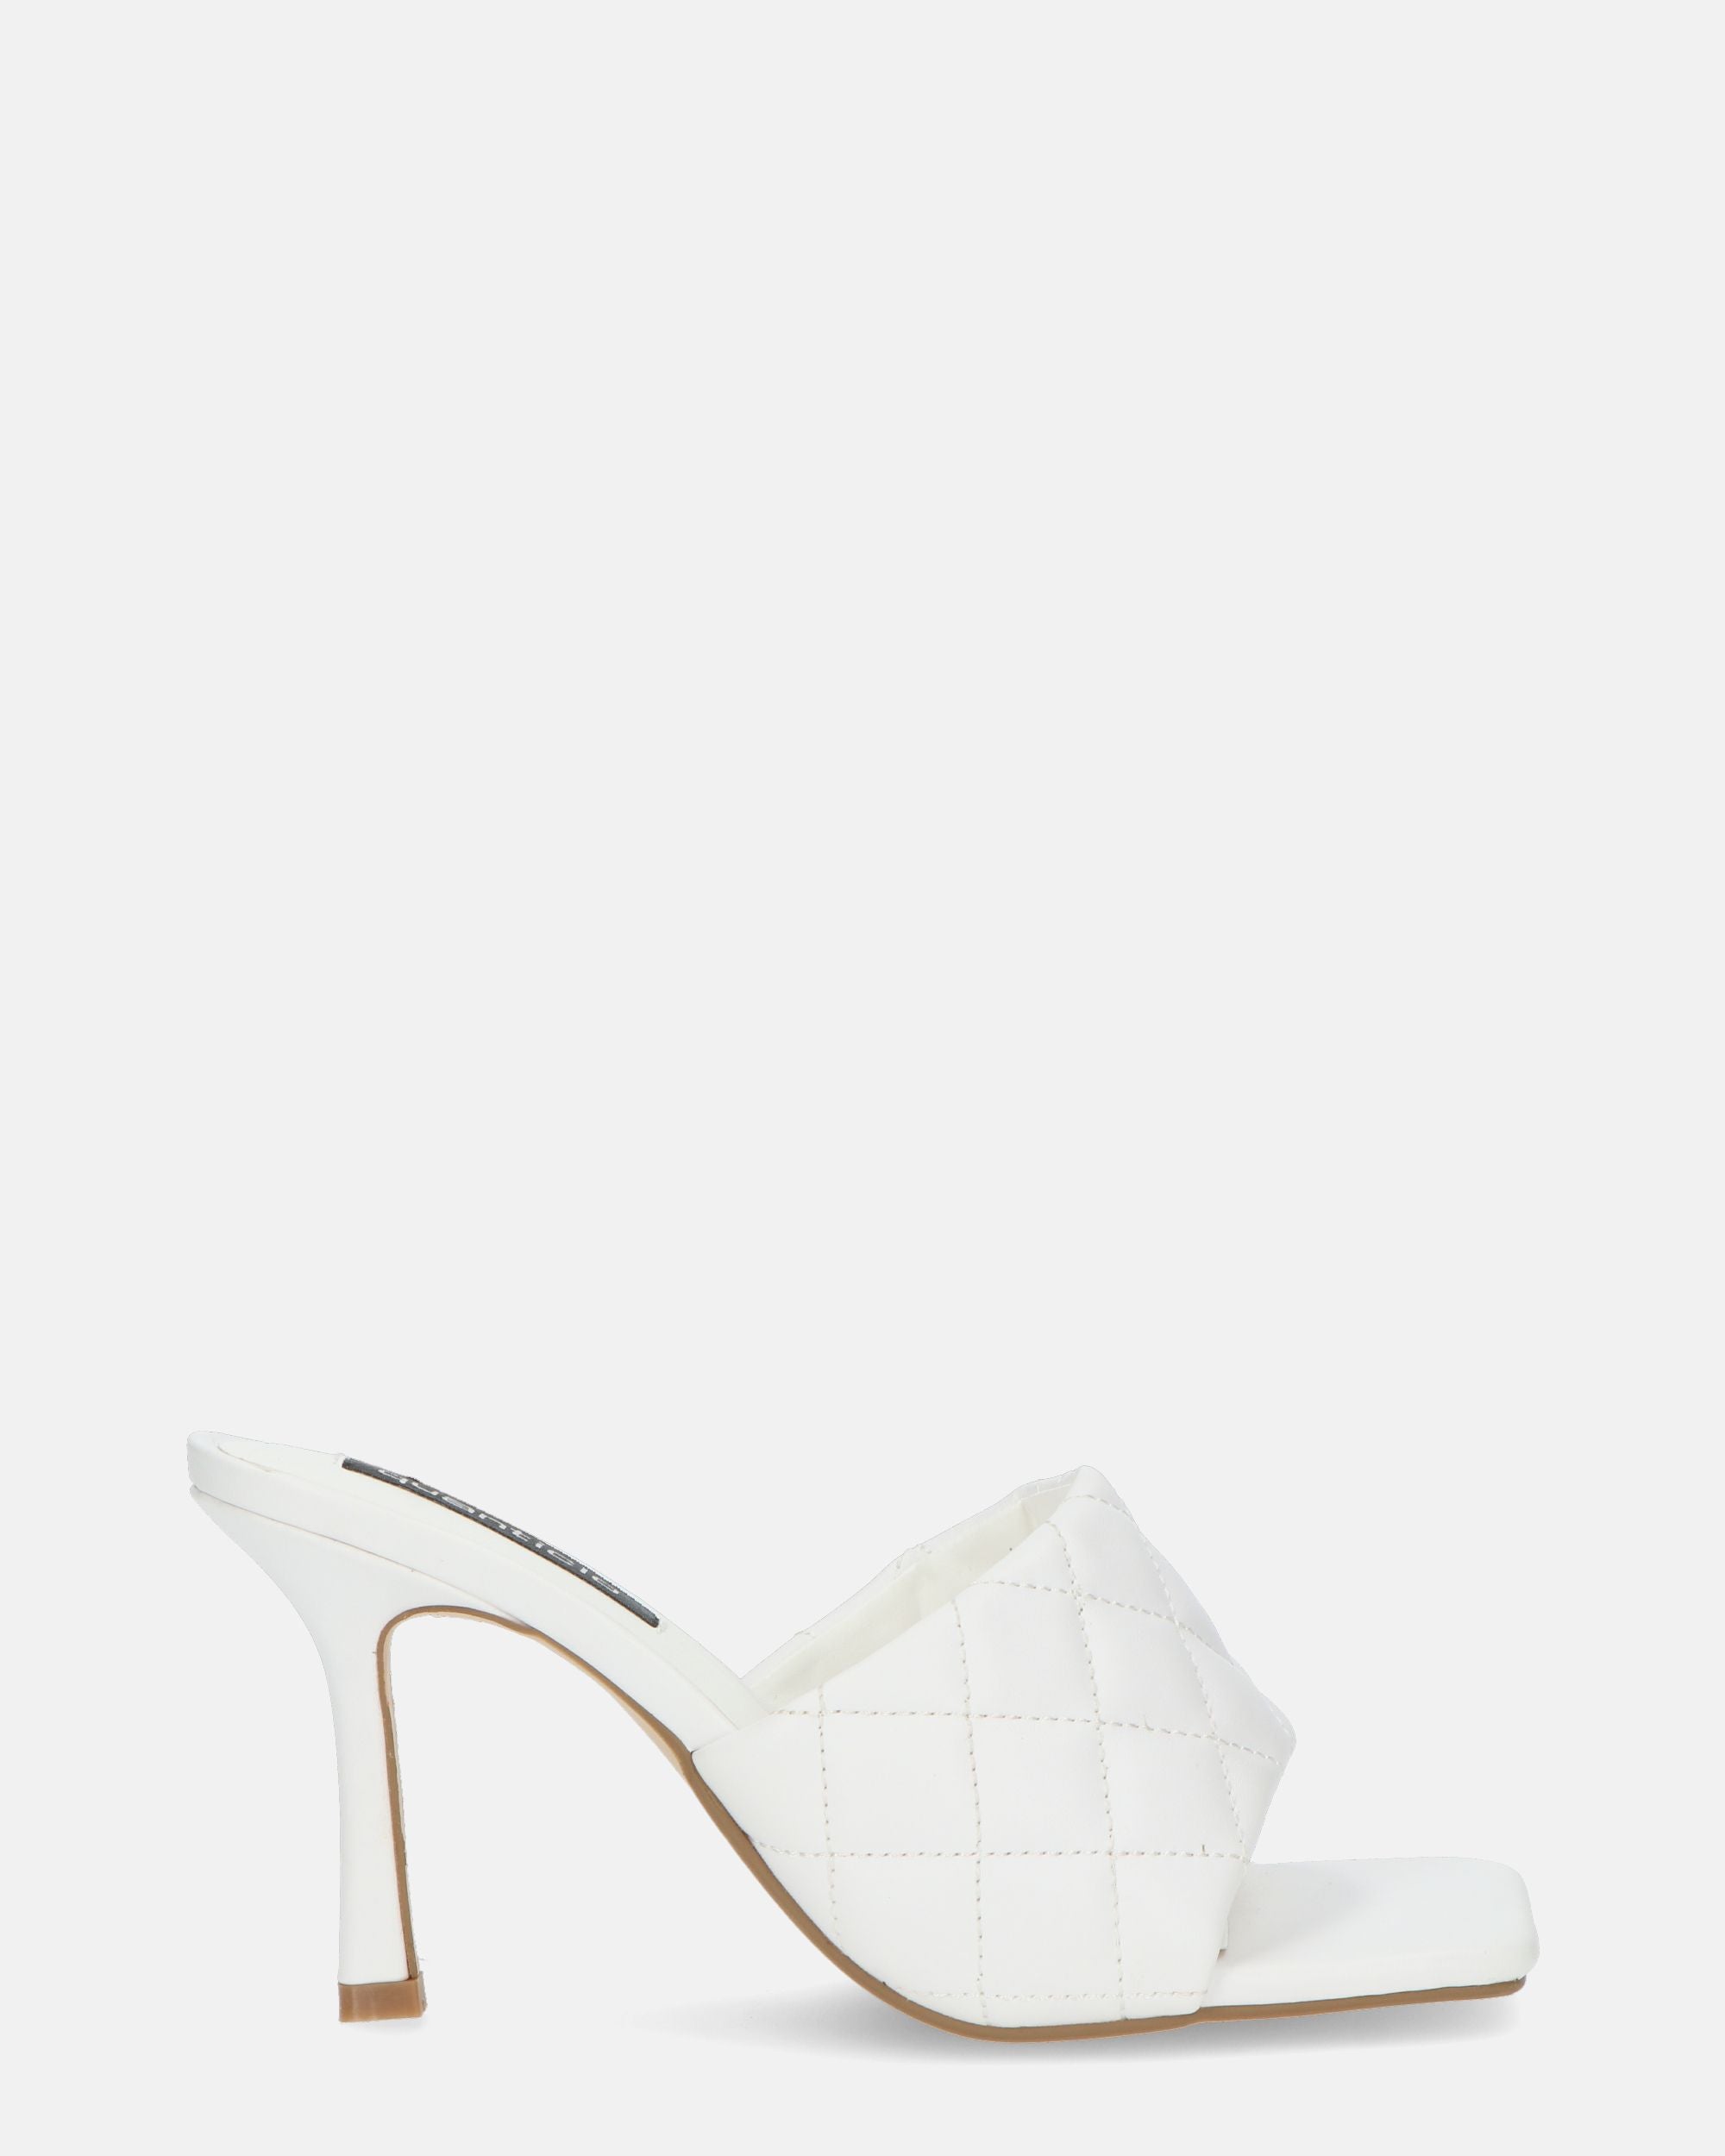 GABY - white stiletto heel with band and stitching